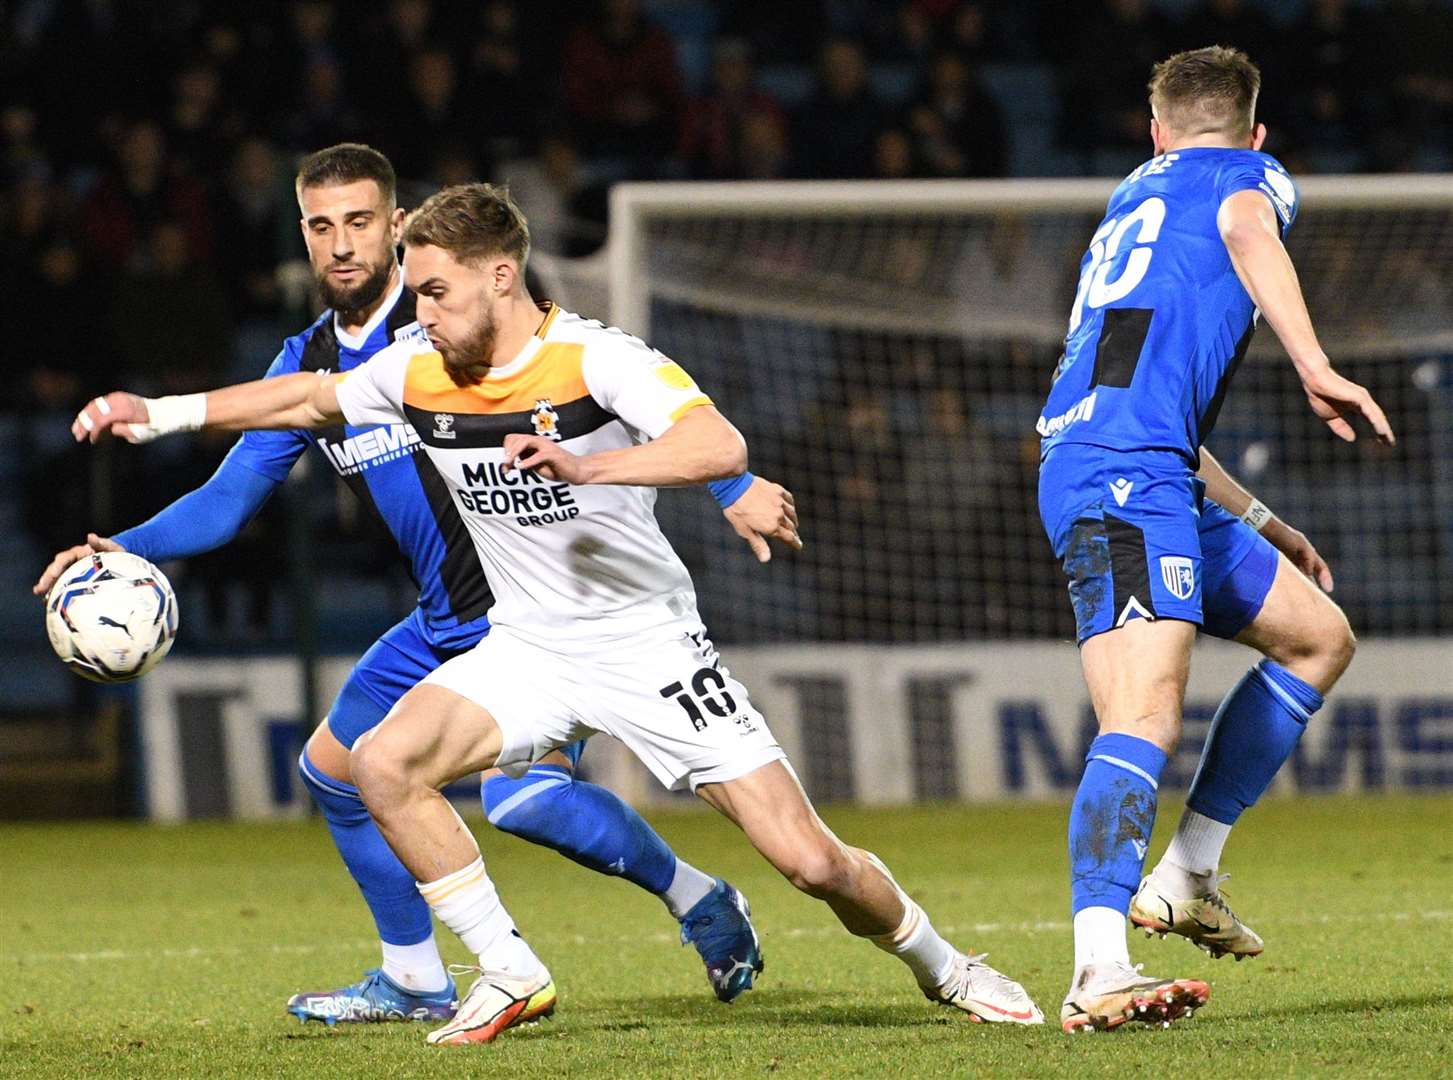 Cambridge's Sam Smith attempts to get away from Gillingham's Max Ehmer. Picture: Barry Goodwin